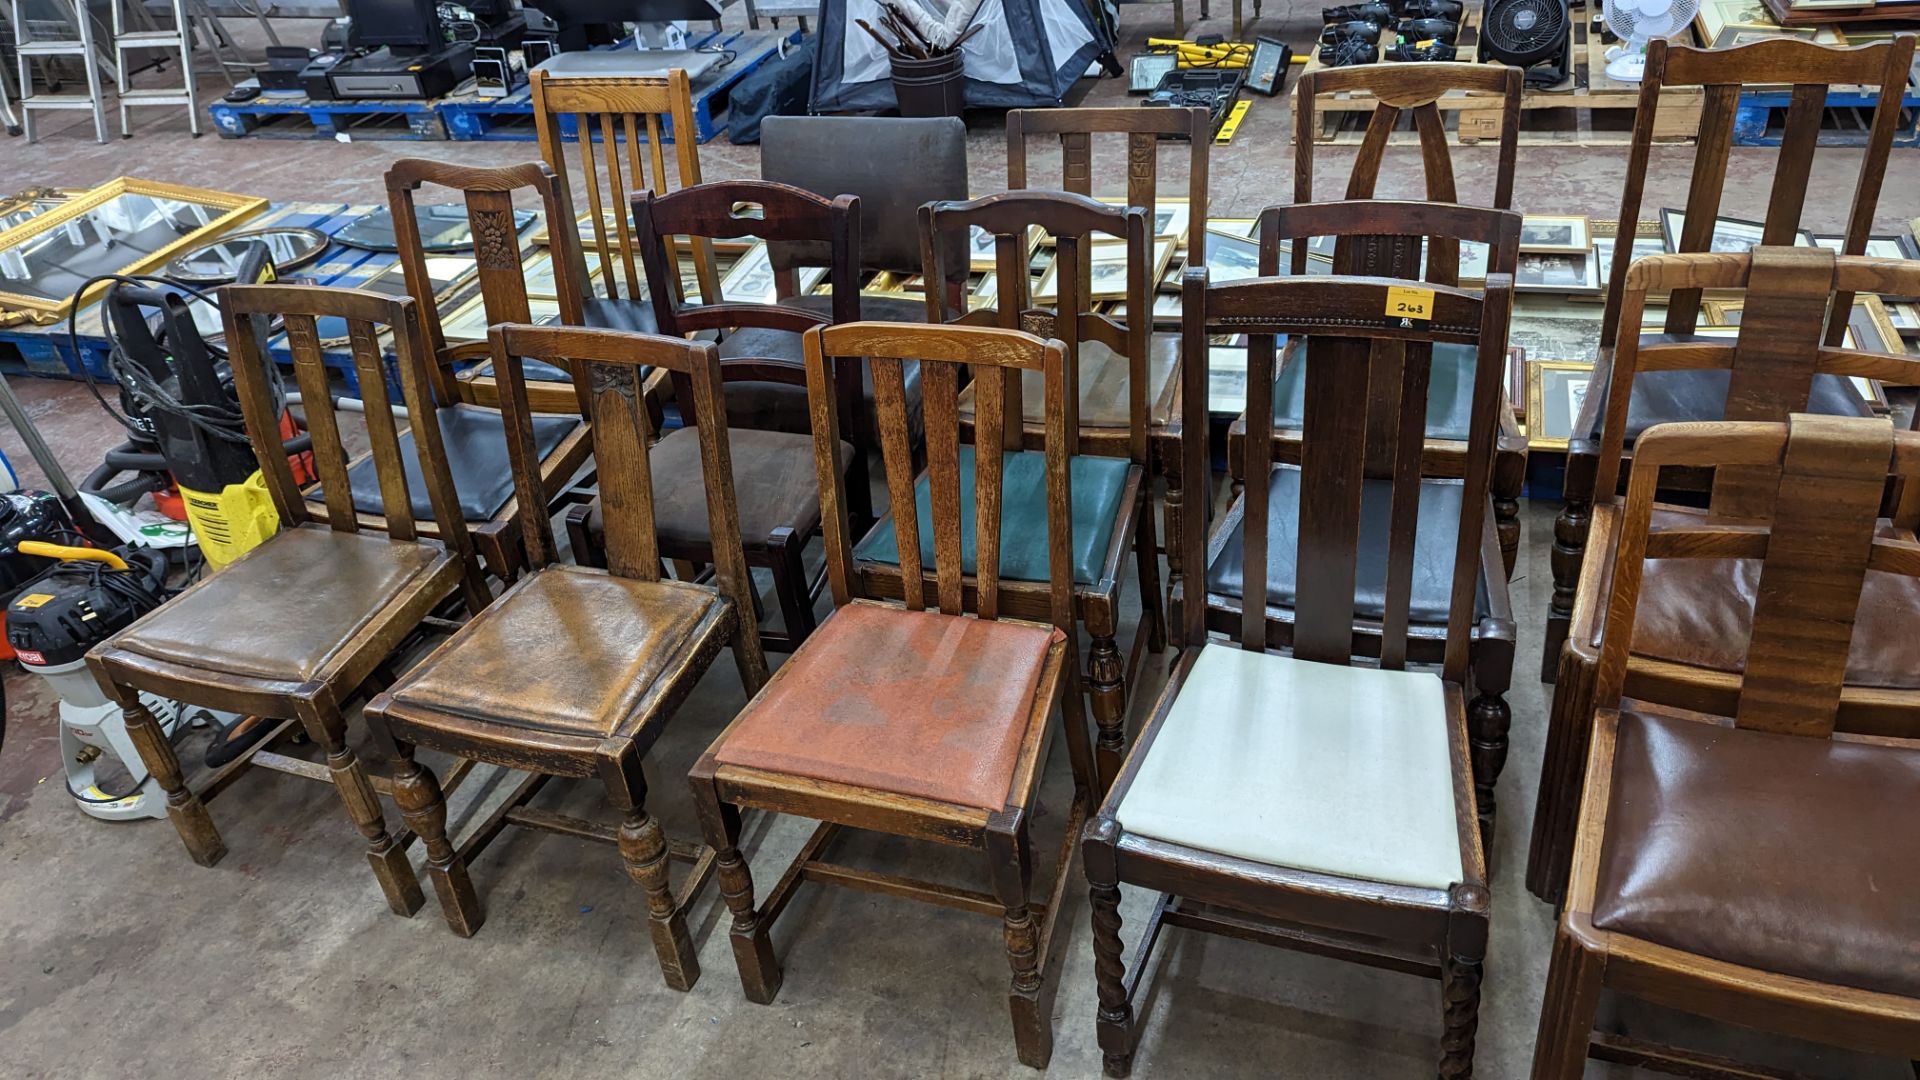 12 off assorted wooden dining chairs - Image 2 of 7